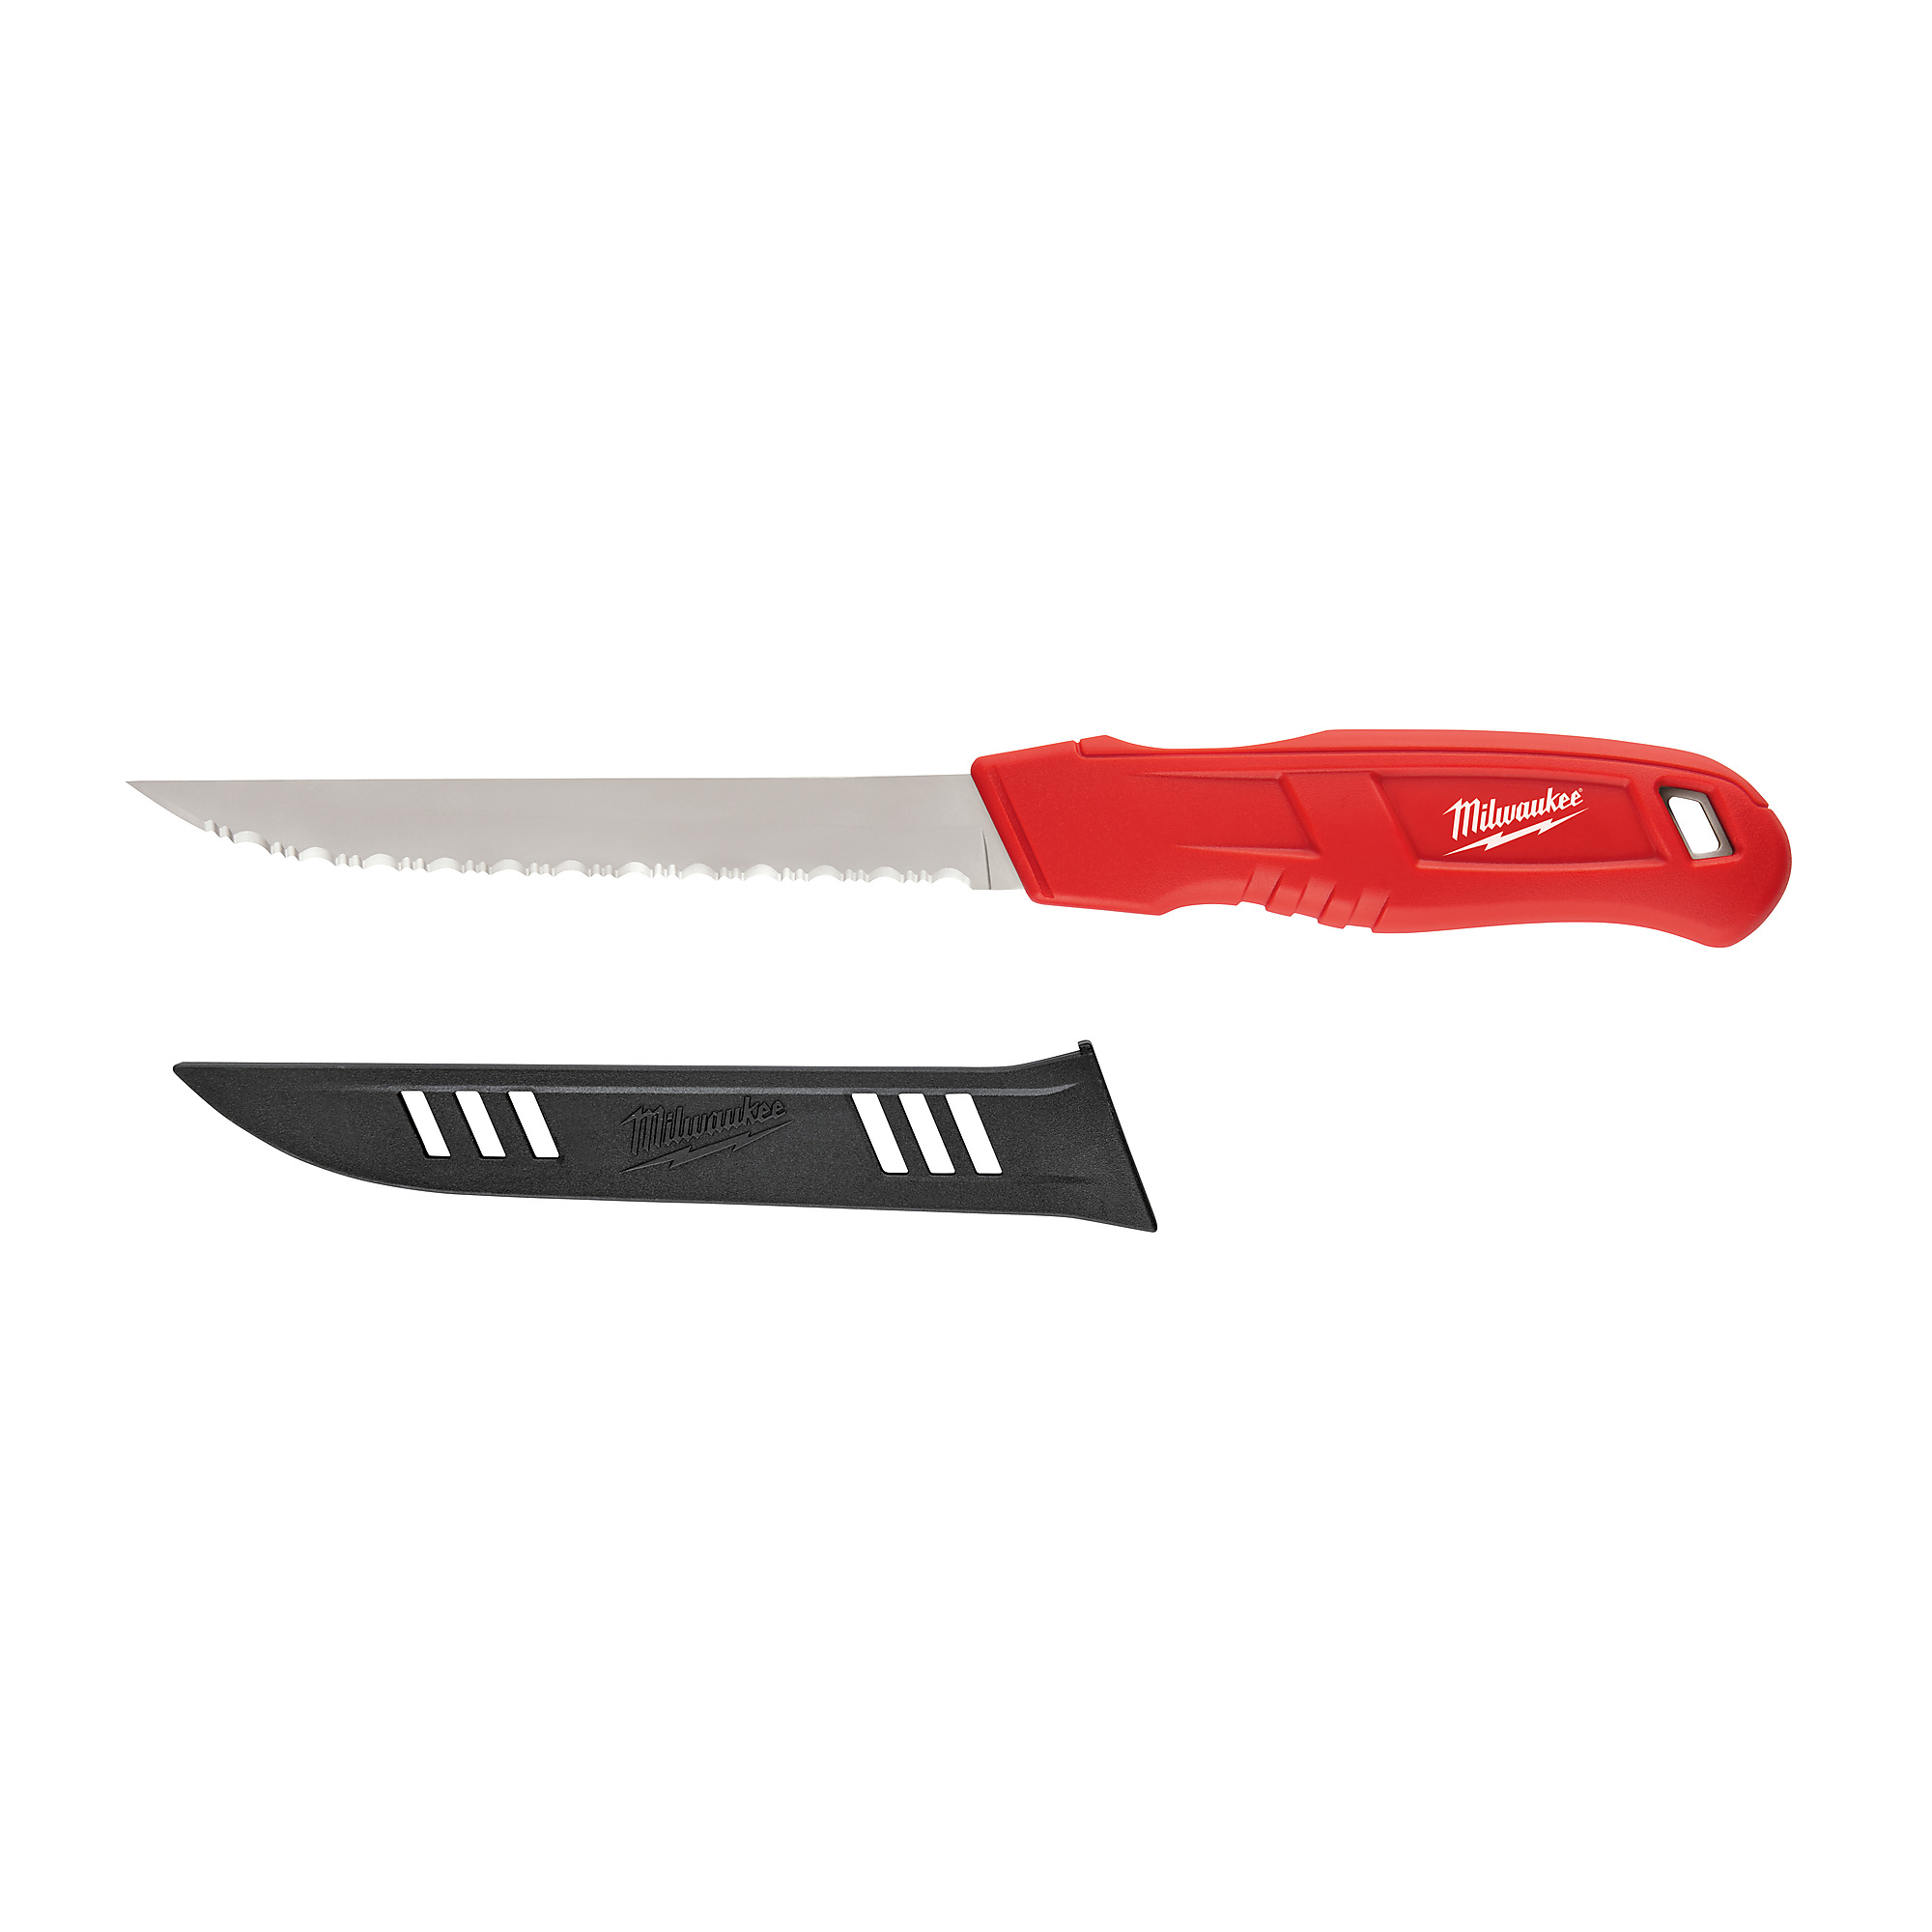 Milwaukee, Serrated Blade Insulation Knife, Blades (qty.) 1, Knives (qty.) 1, Model 48-22-1922